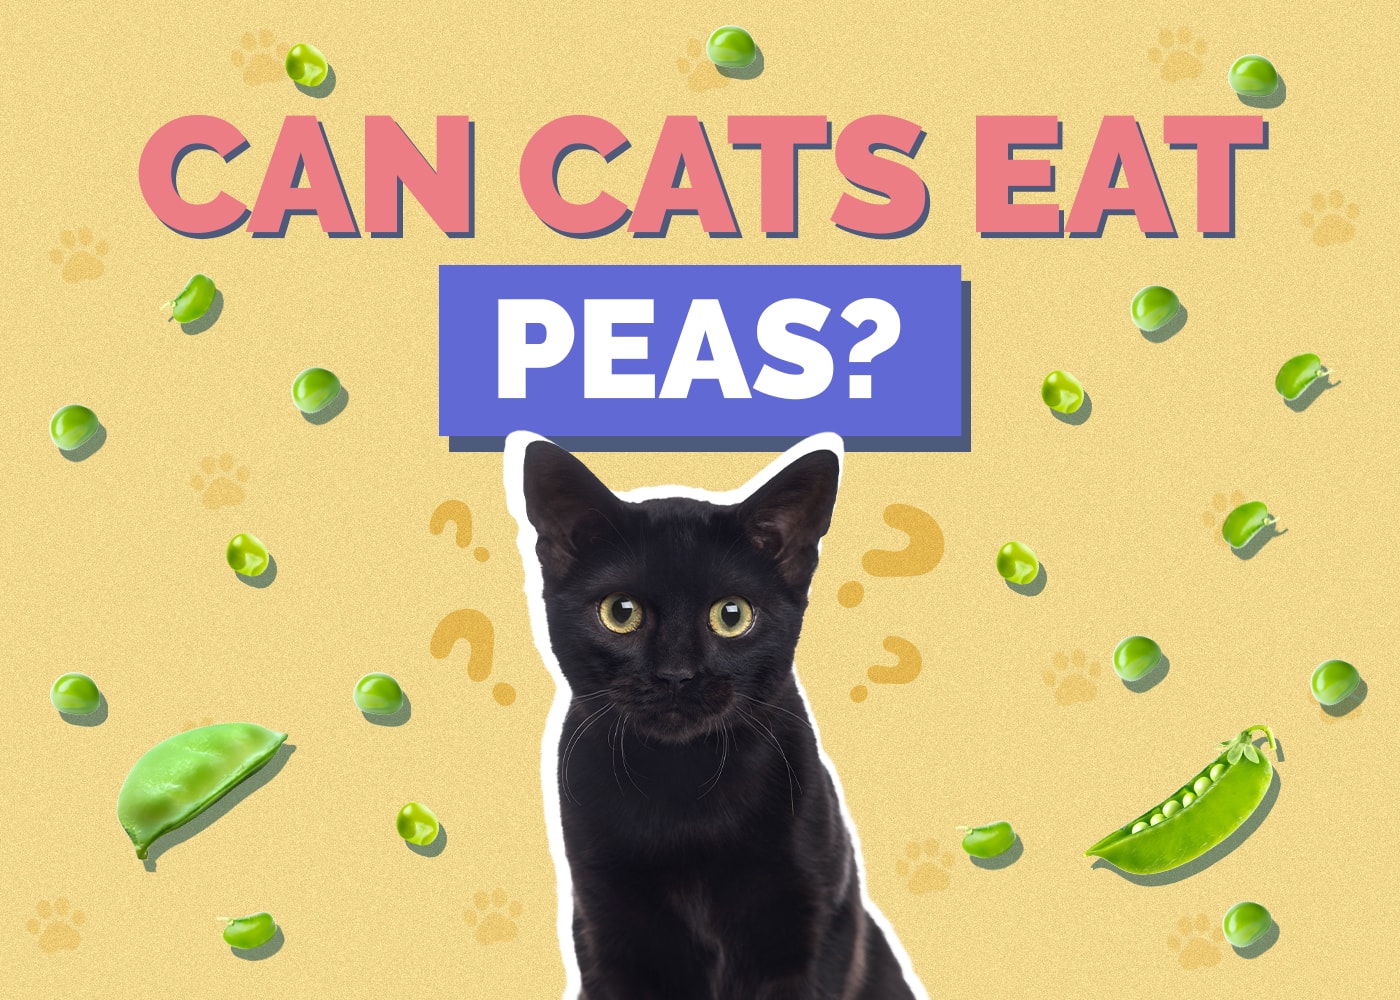 Can Cats Eat peas